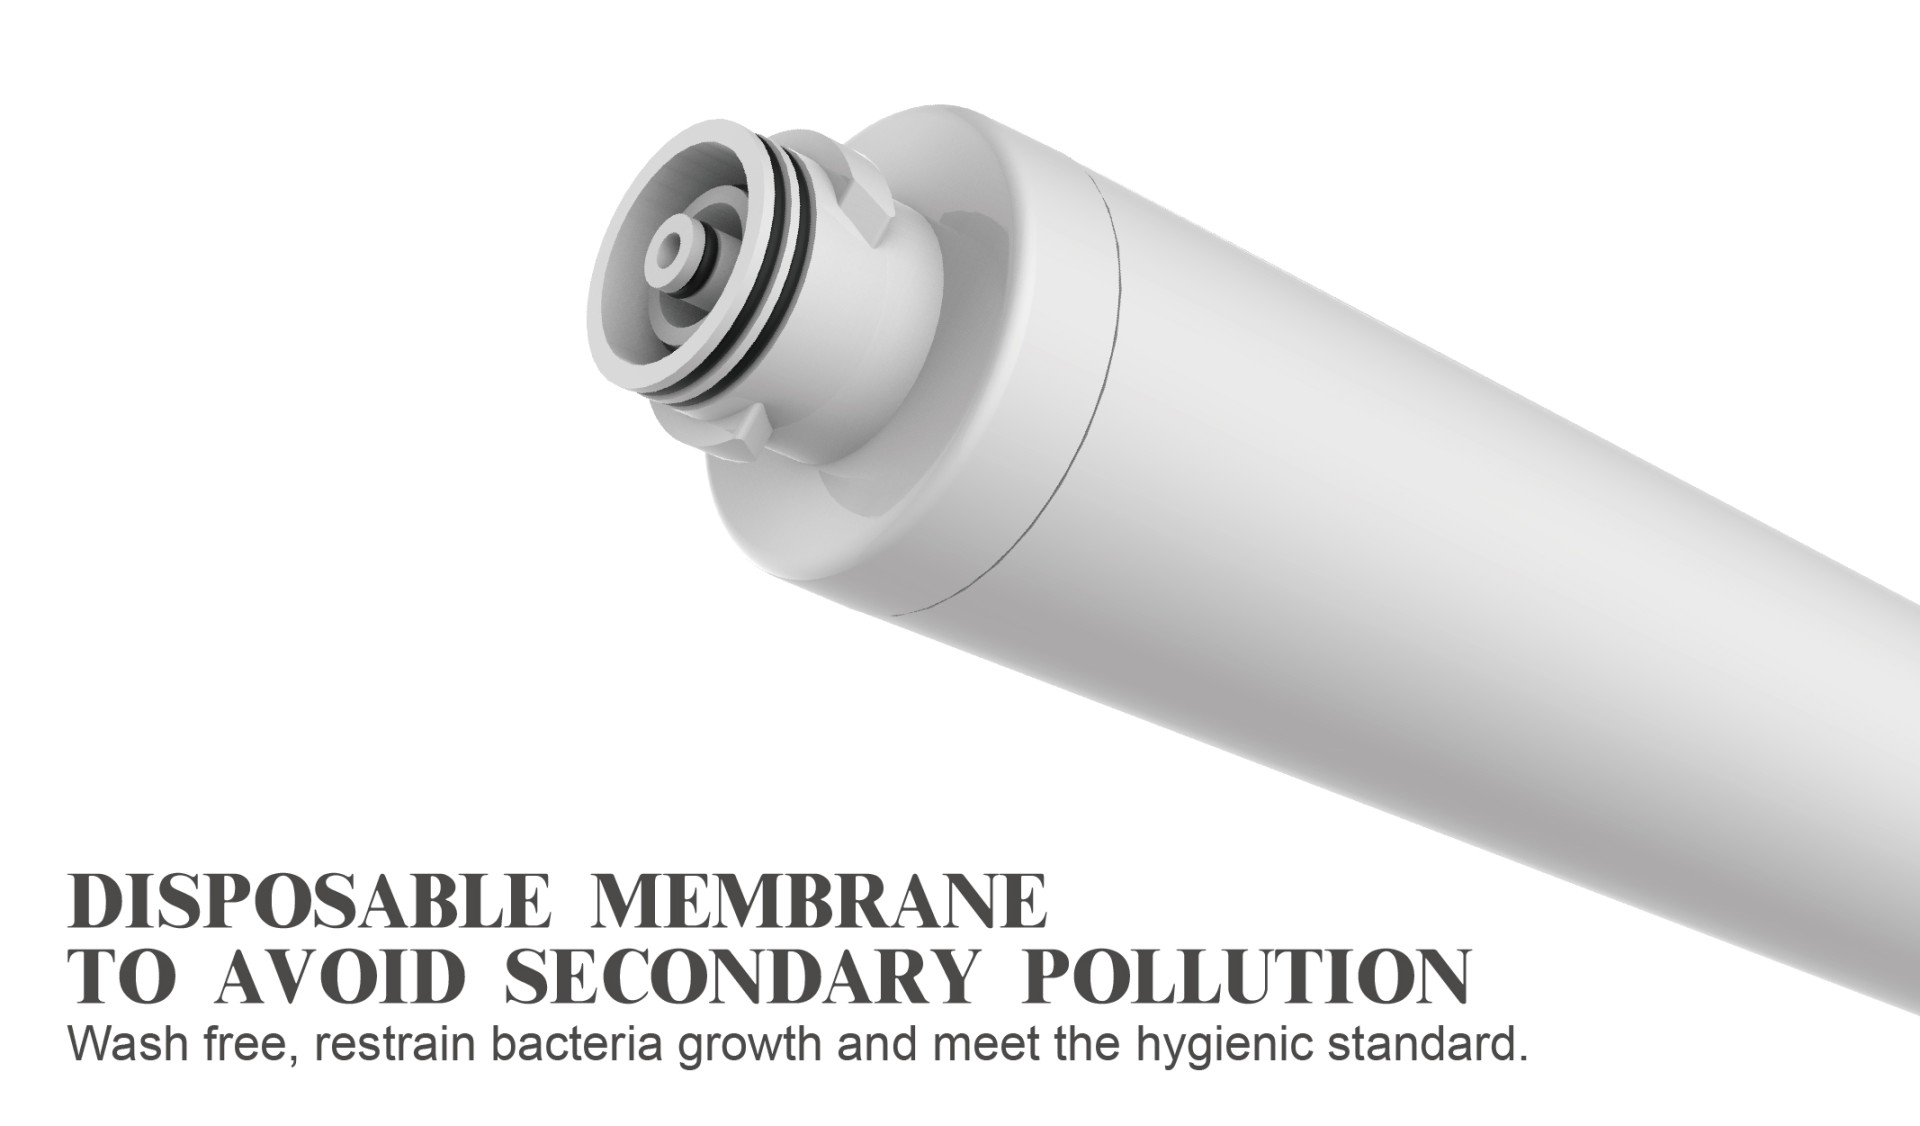 DISPOSABLE MEMBRANE TO AVOID SECONDARY POLLUTION